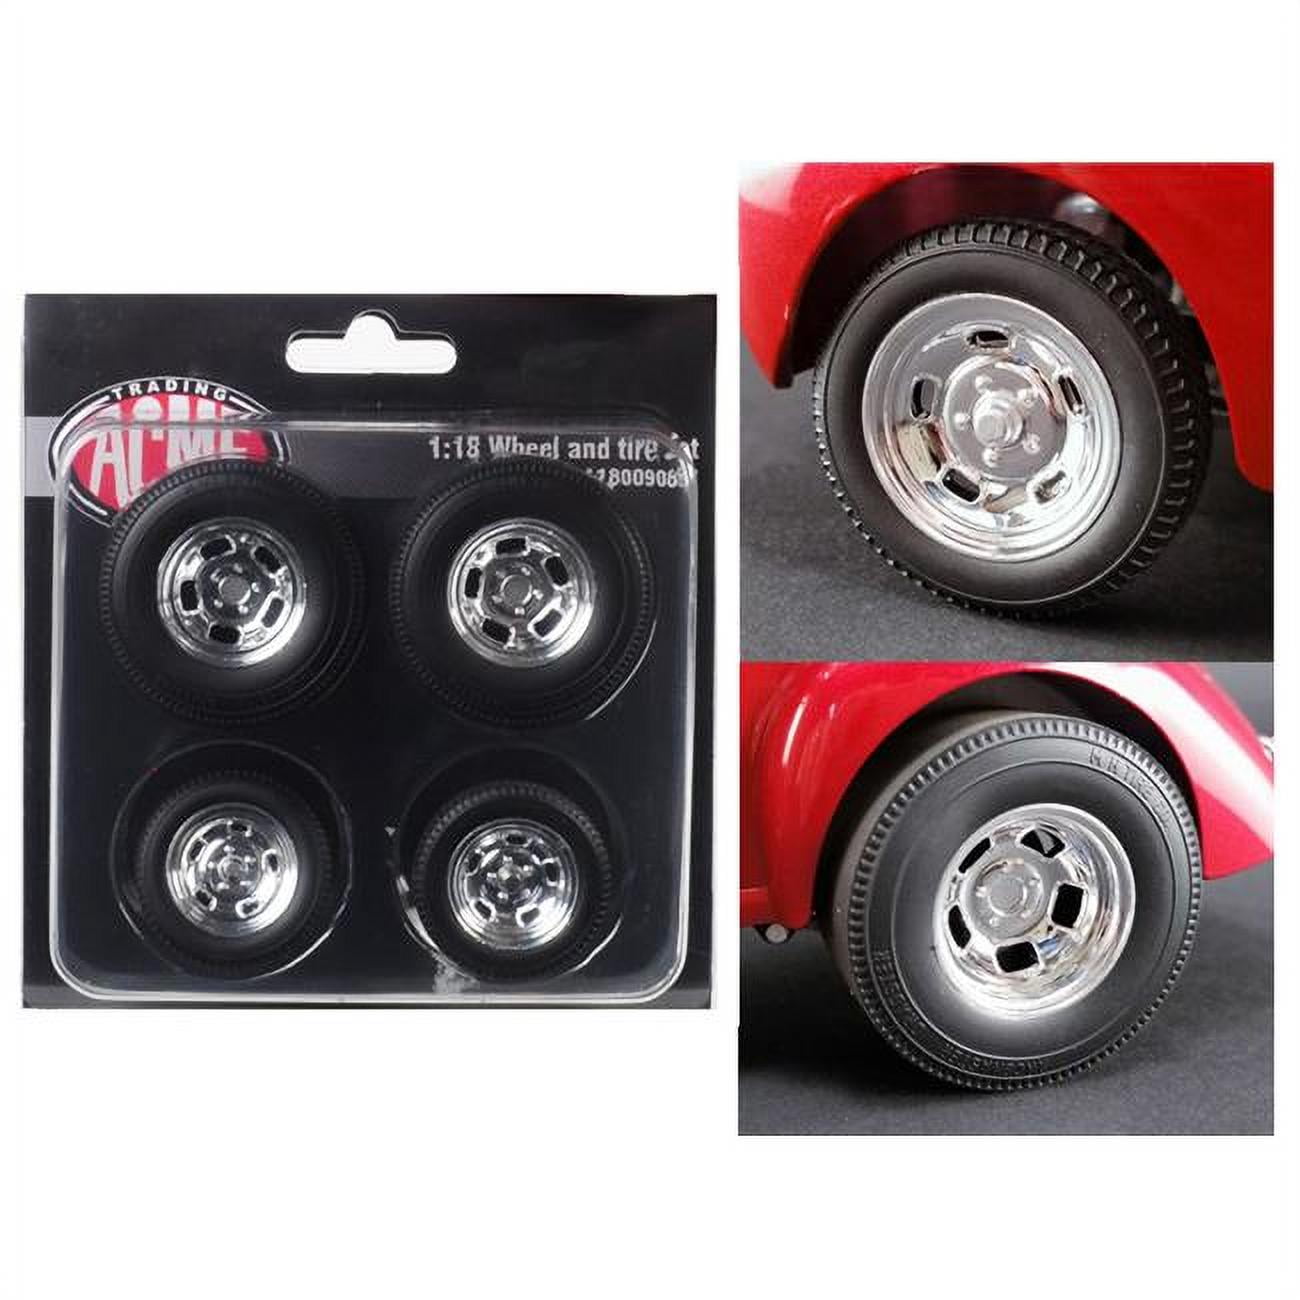 A1800908w 1 Isto 18 Polished Drag Wheels & Tires From 1941 Gasser, 4 Piece